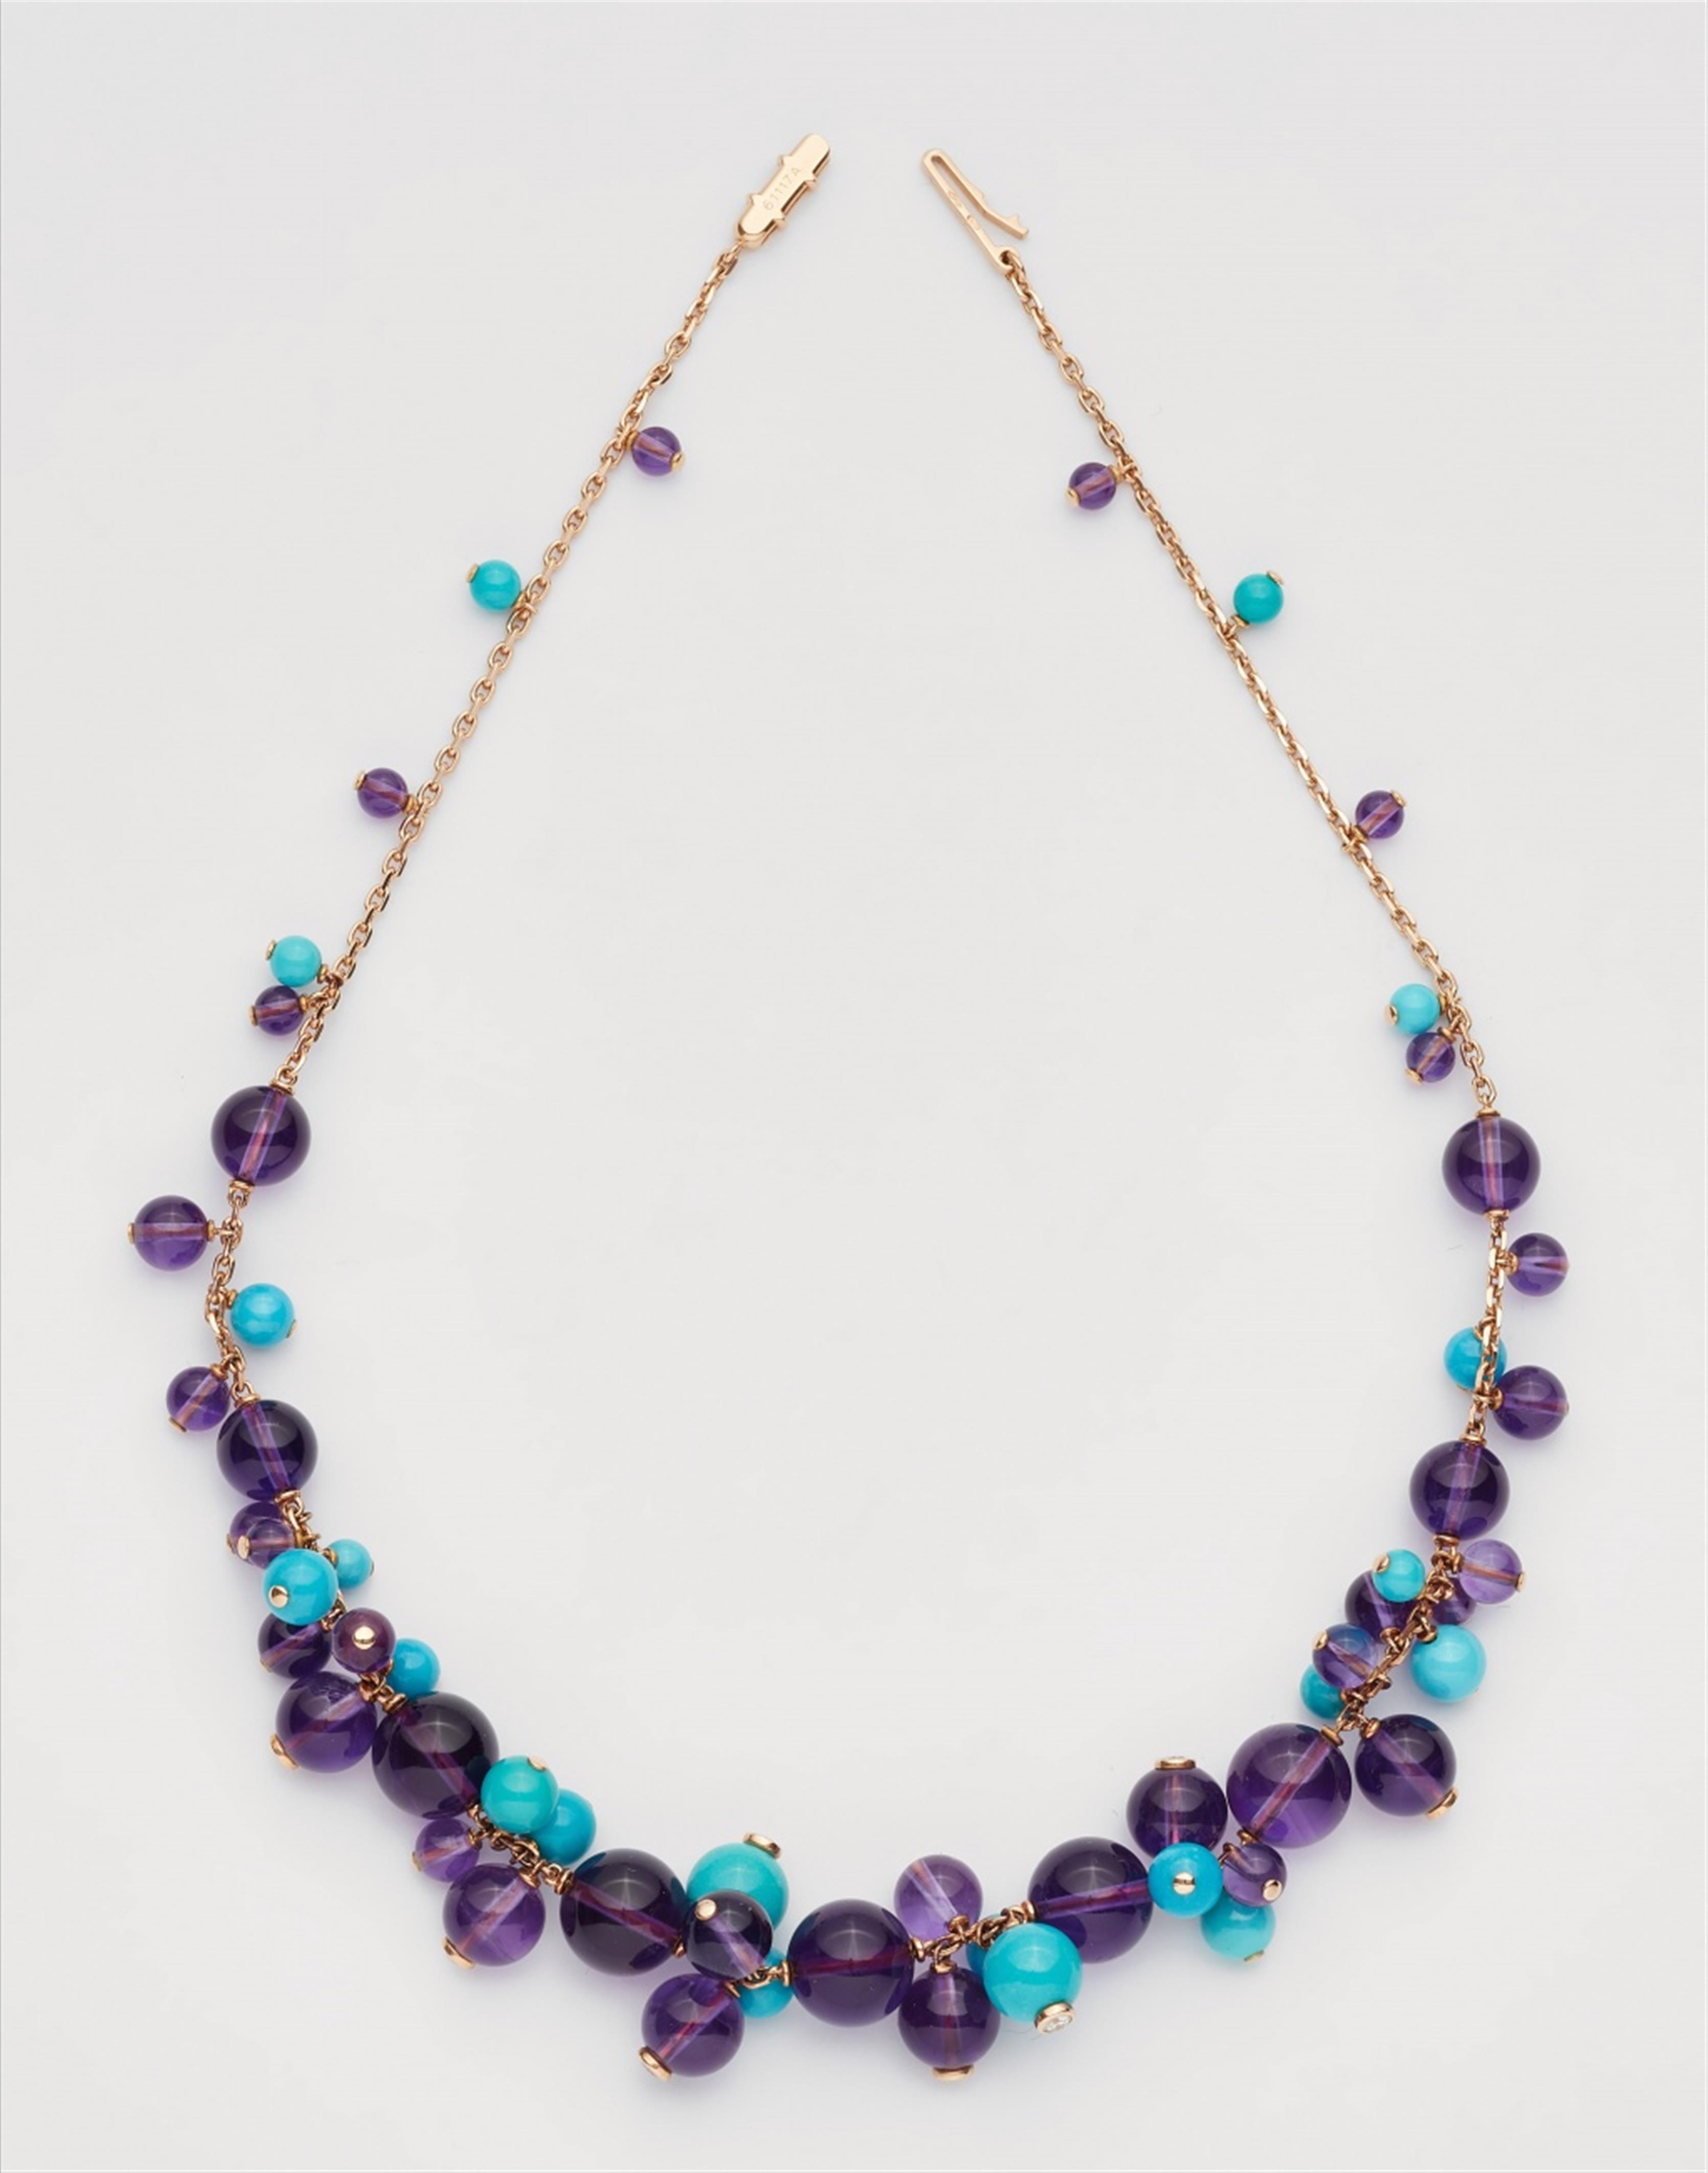 An 18k rose gold turquoise and amethyst necklace "Les Delices de Goa" - image-1